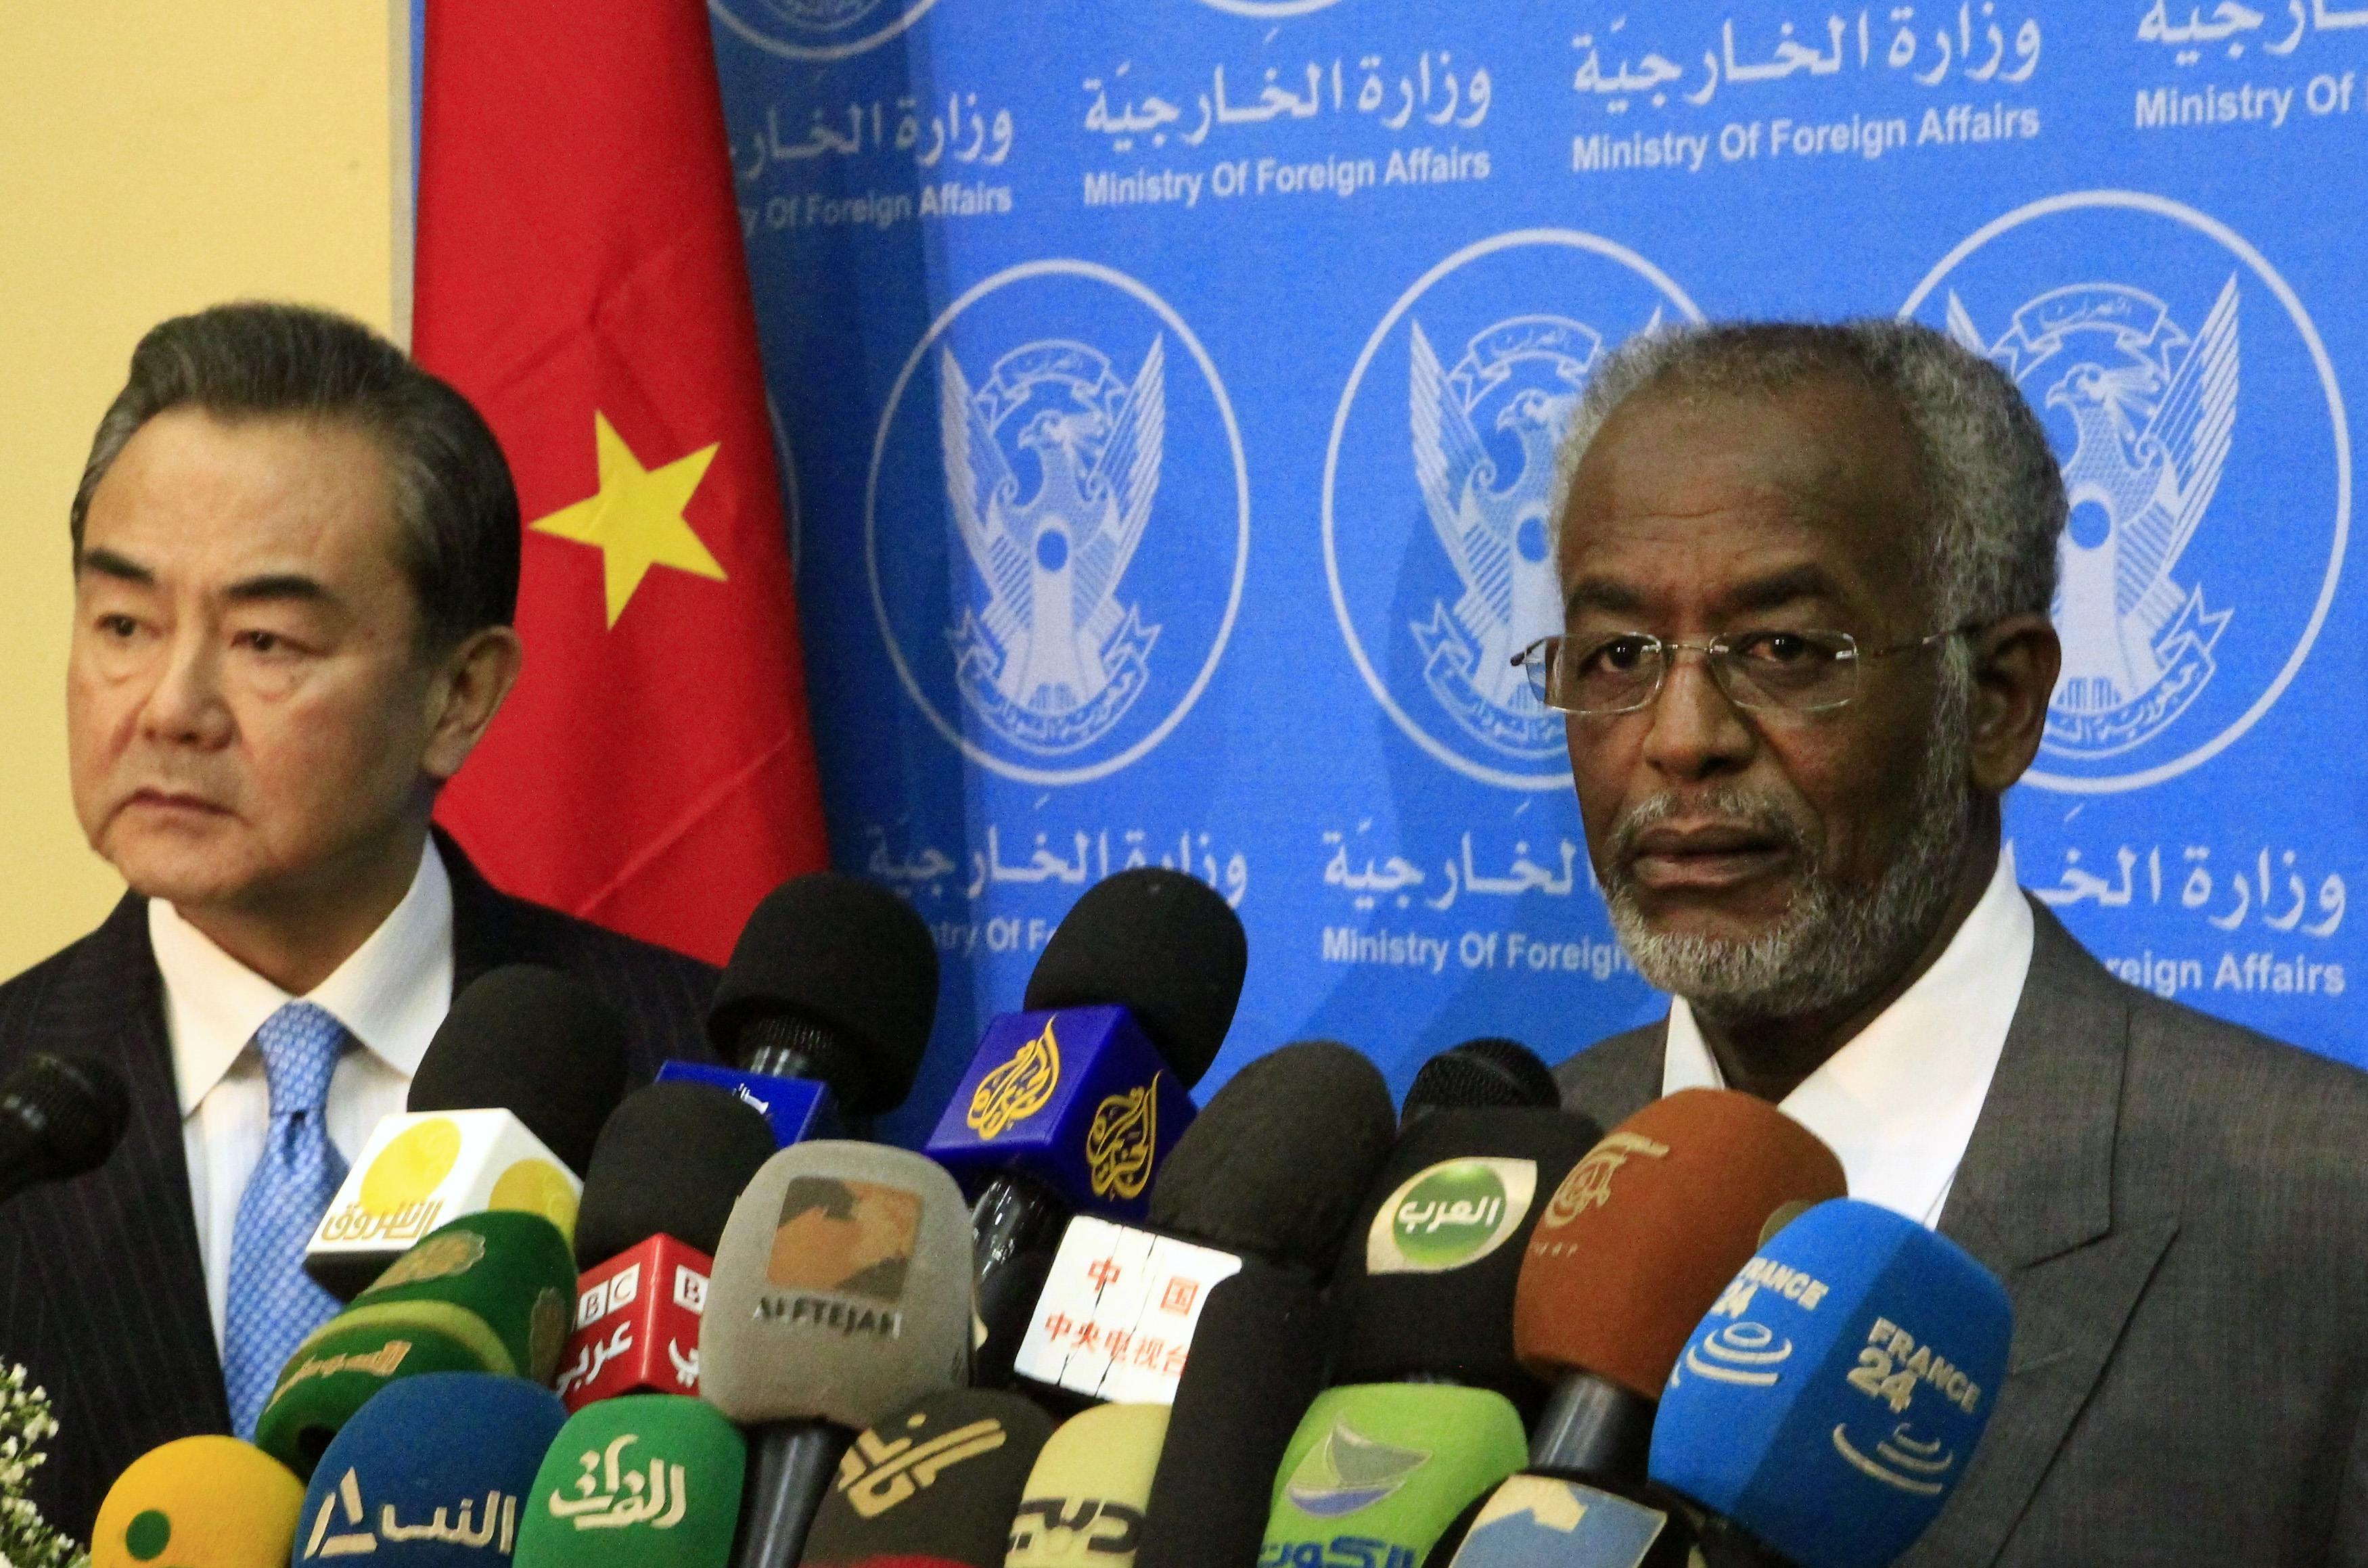 Sudan's Foreign Minister Ali Karti (R) speaks next to China's Foreign Minister Wang Yi during a joint news conference in Khartoum January 11, 2015